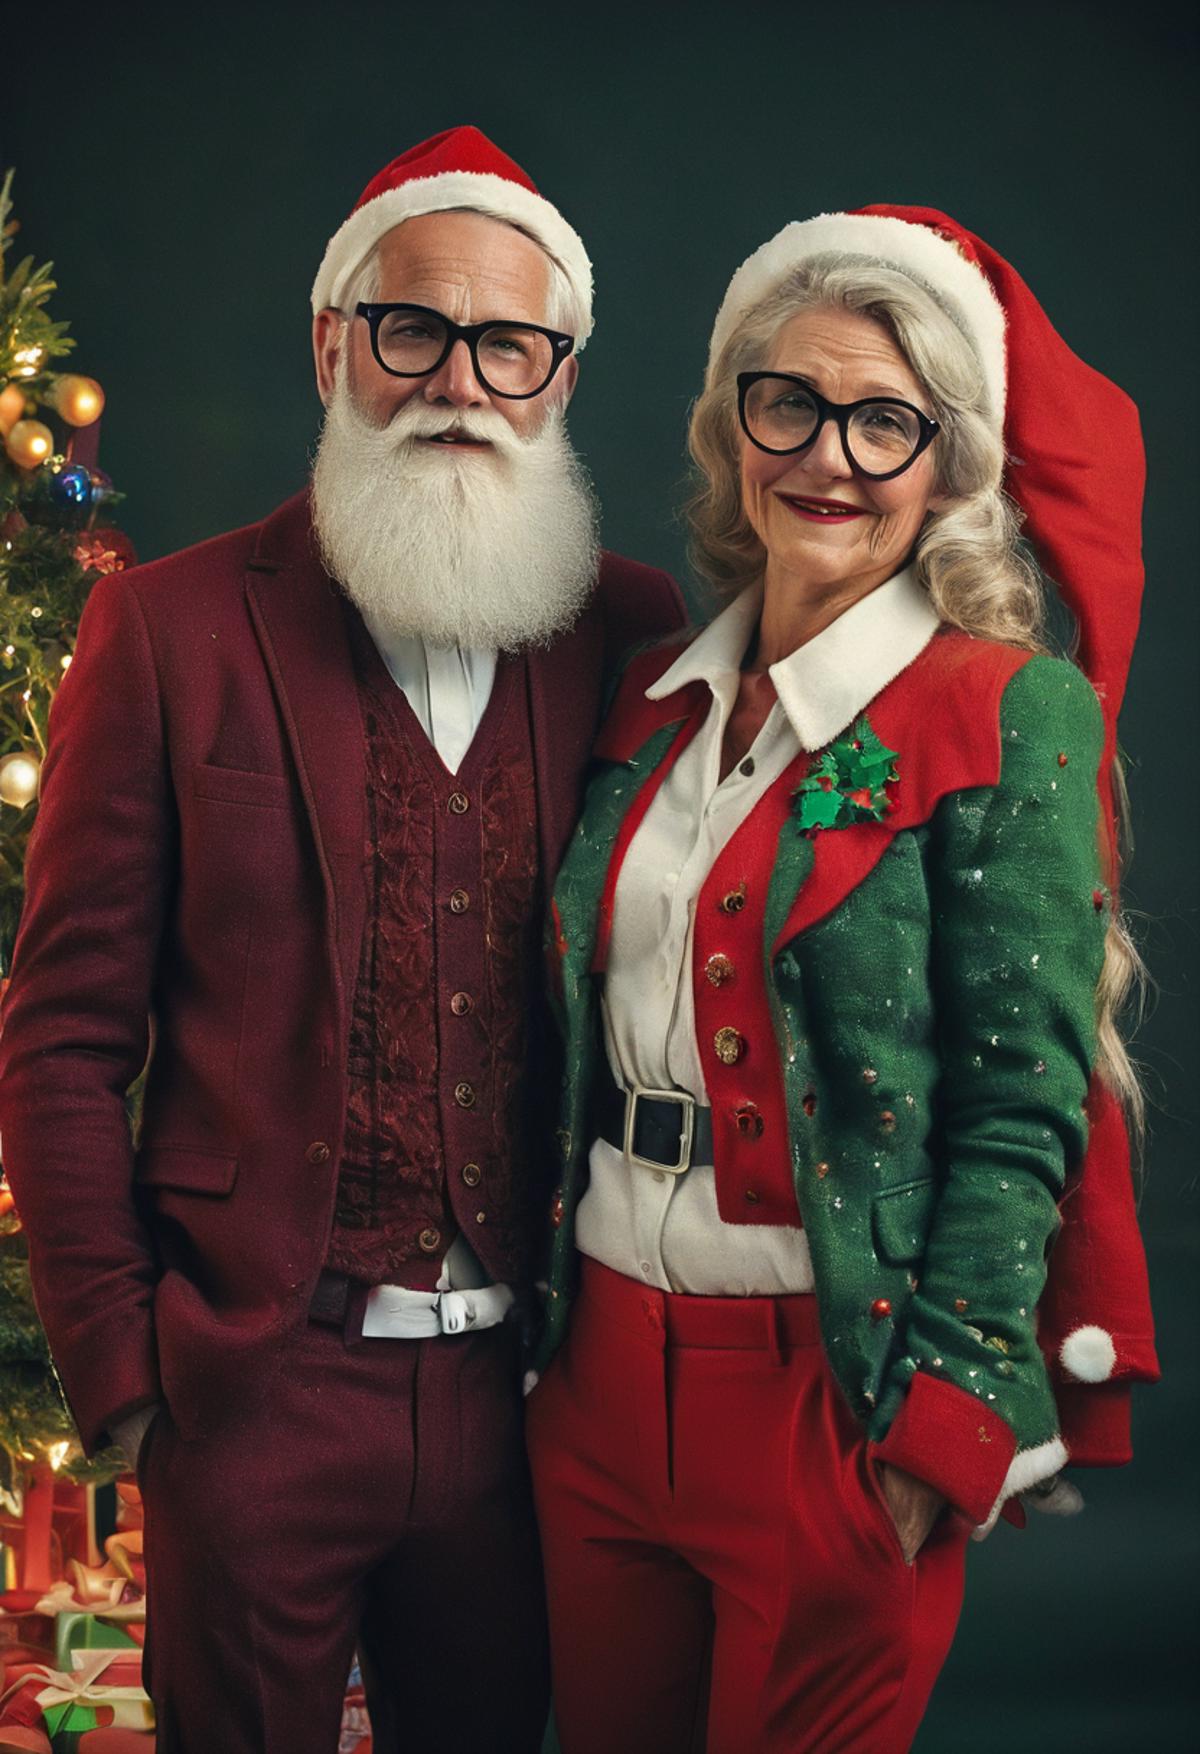 A man and a woman wearing Christmas outfits pose together.